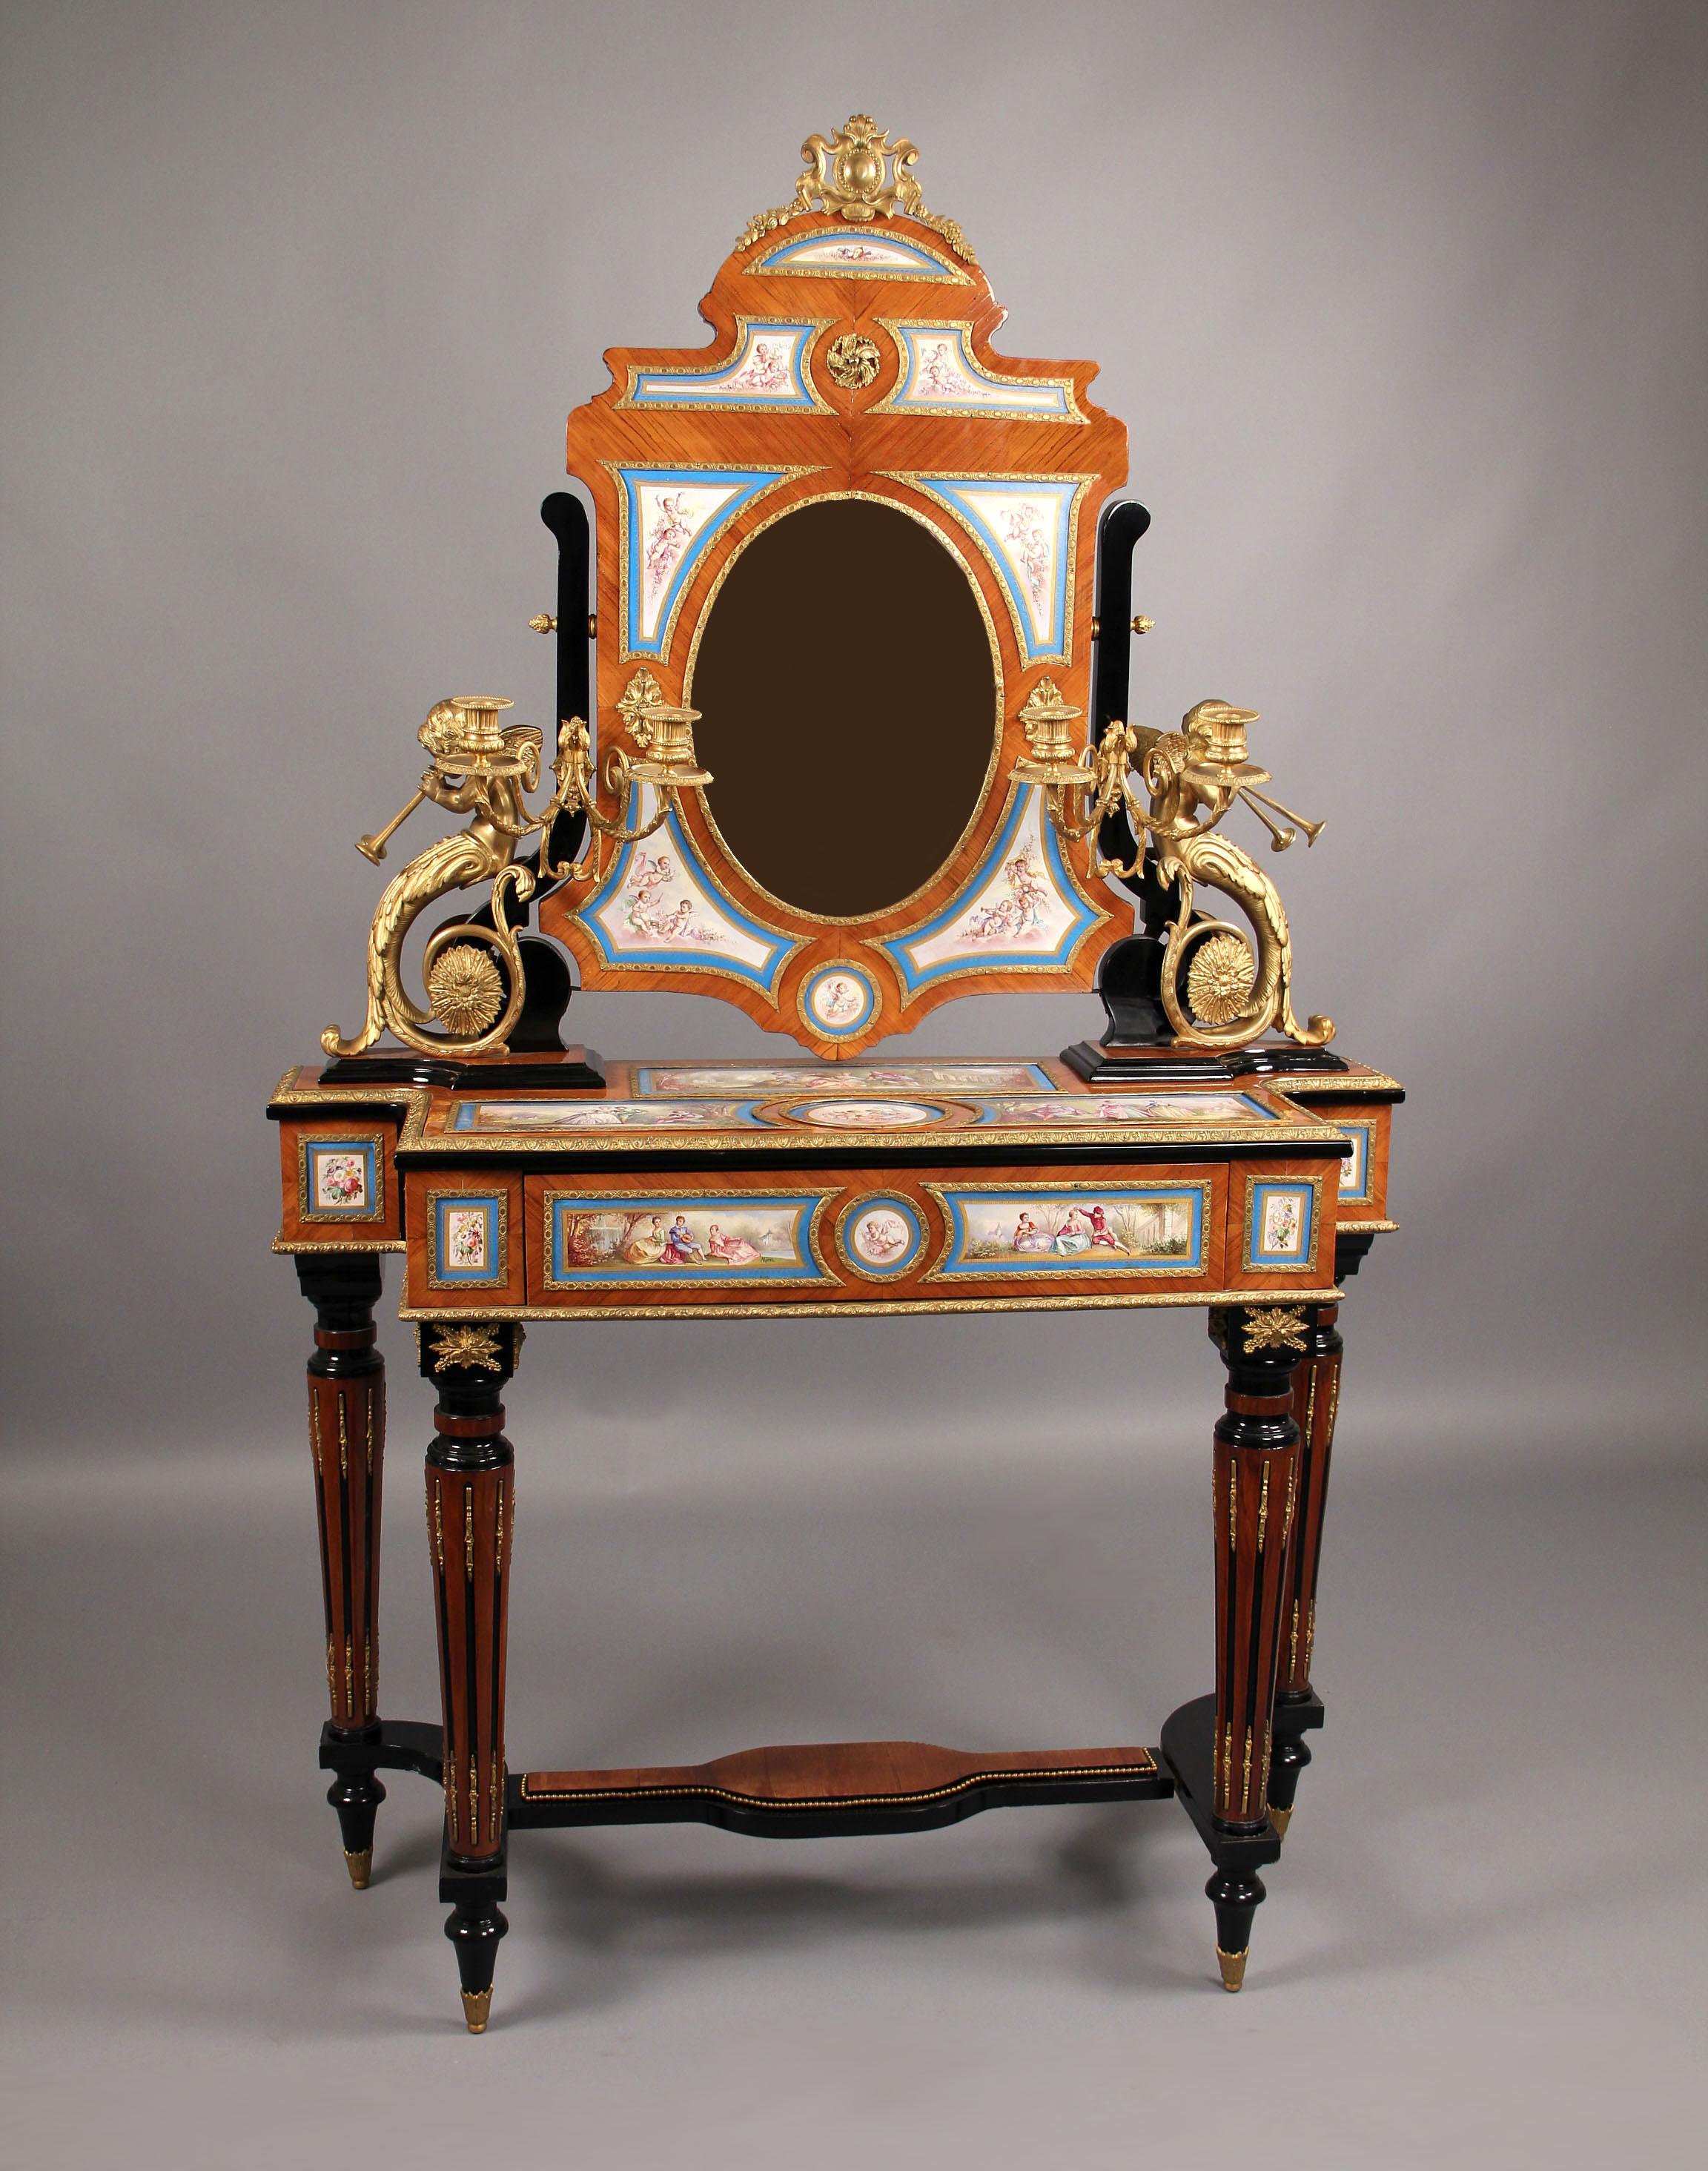 A beautiful late 19th century gilt bronze-mounted Louis XVI sèvres style dressing table.

This wonderful and rare table is mounted by over twenty three individual porcelain plaques depicting flowers, cherubs and landscape scenes with lovers. The